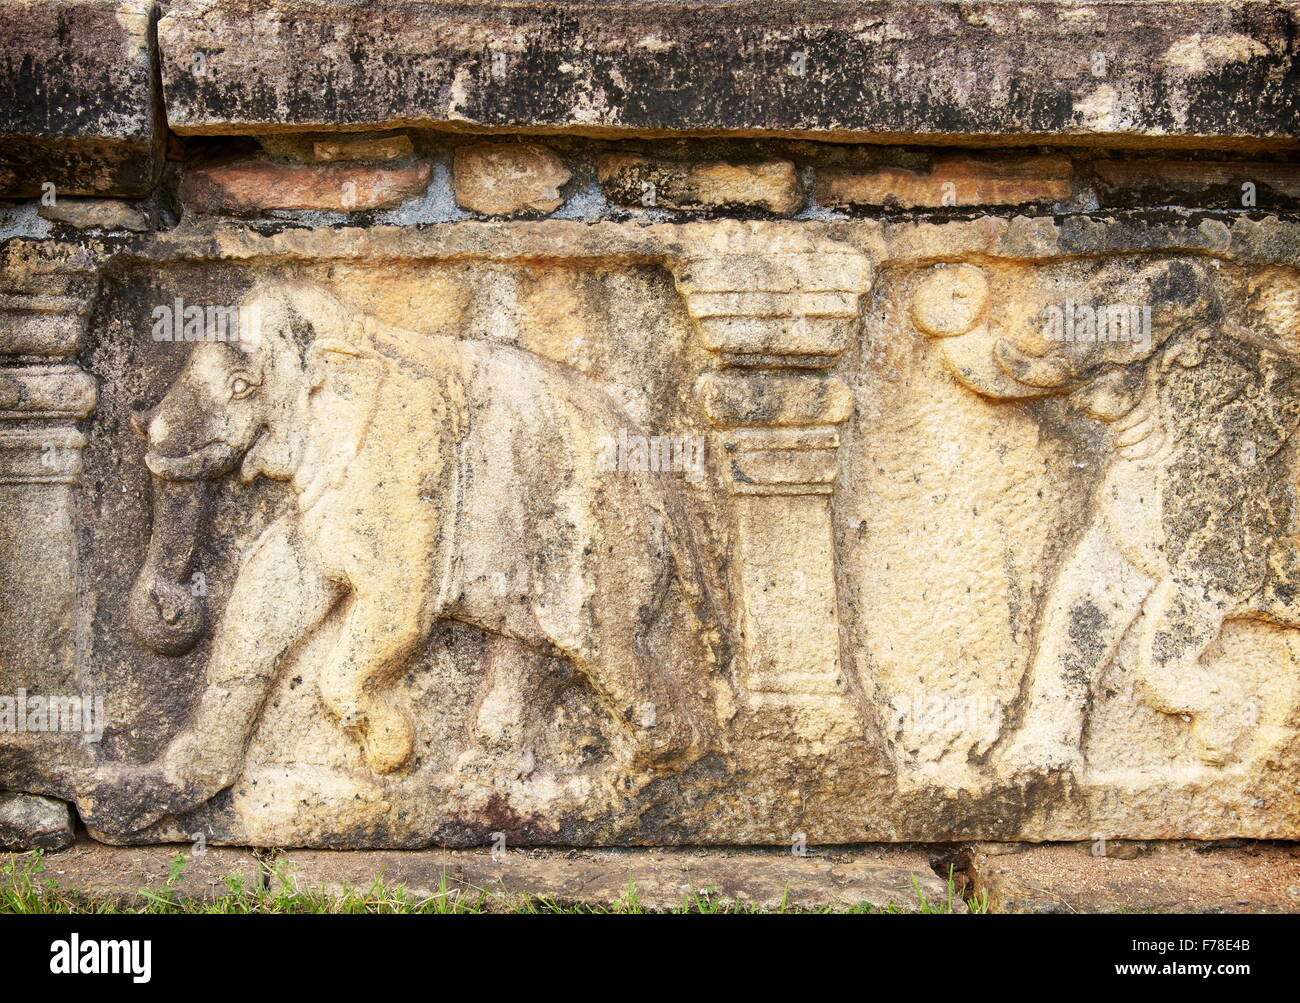 Sri Lanka - ruins of ancient royal residence, detail with elephant, Polonnaruwa, Ancient City area, UNESCO World Heritage Site Stock Photo